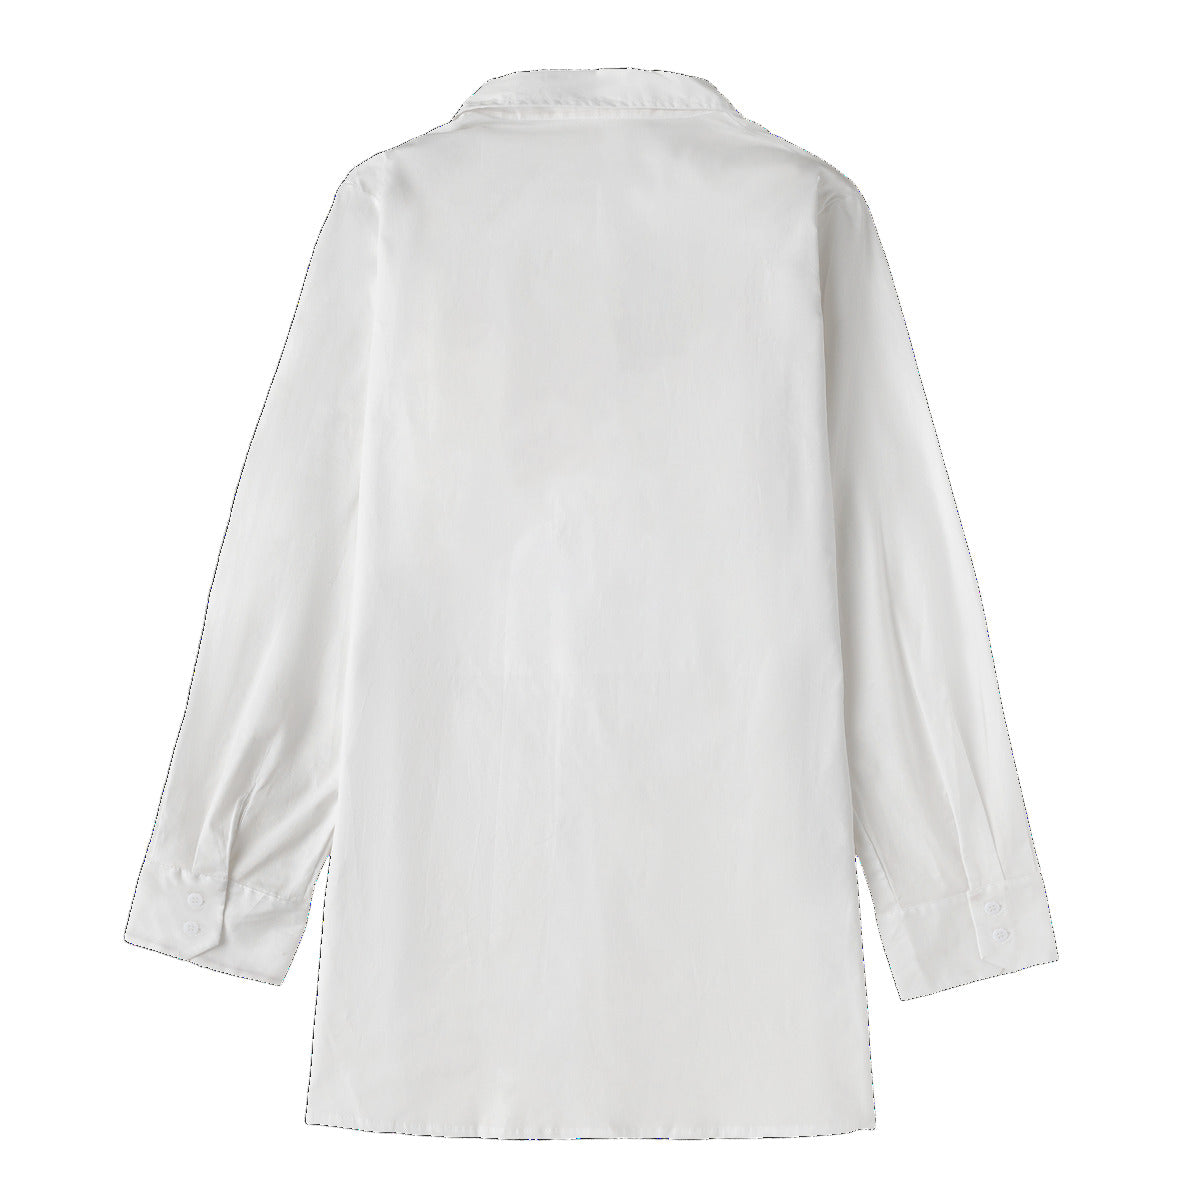 Pearl Meadow Button Up Cotton Blouse | Hypoallergenic - Allergy Friendly - Naturally Free